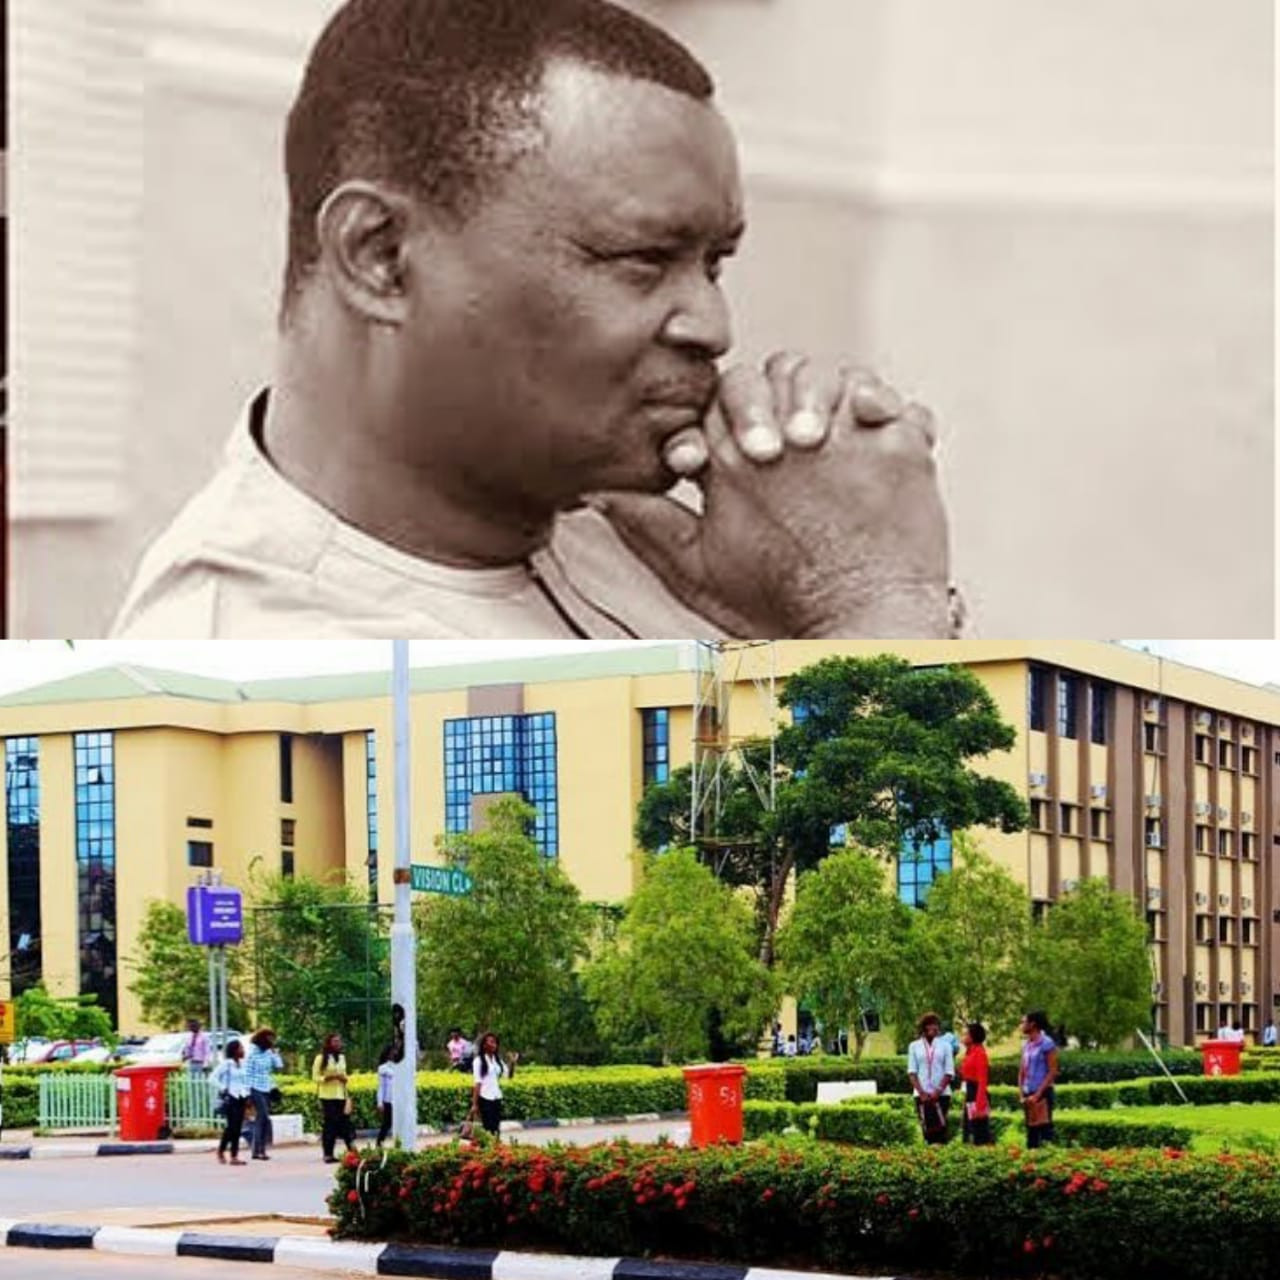 Living like a village King on a campus that you would leave behind – Mike Bamiloye slams ”Papas and Mamas” of campus fellowships who have protocols and bodyguards assigned to them